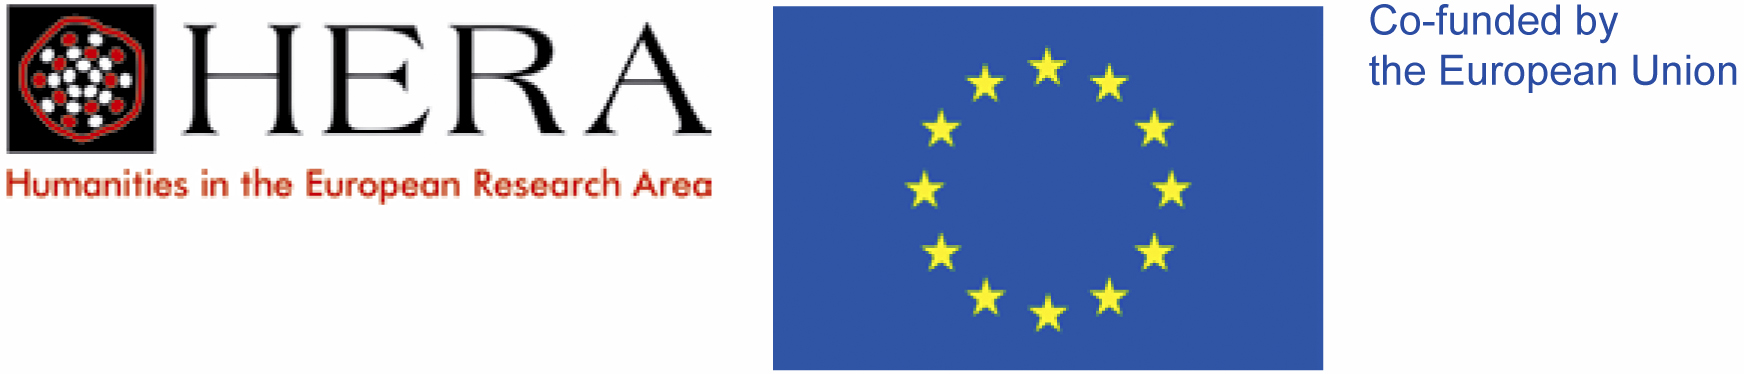 Co-funded by the European Union, HERA logo and EU flag